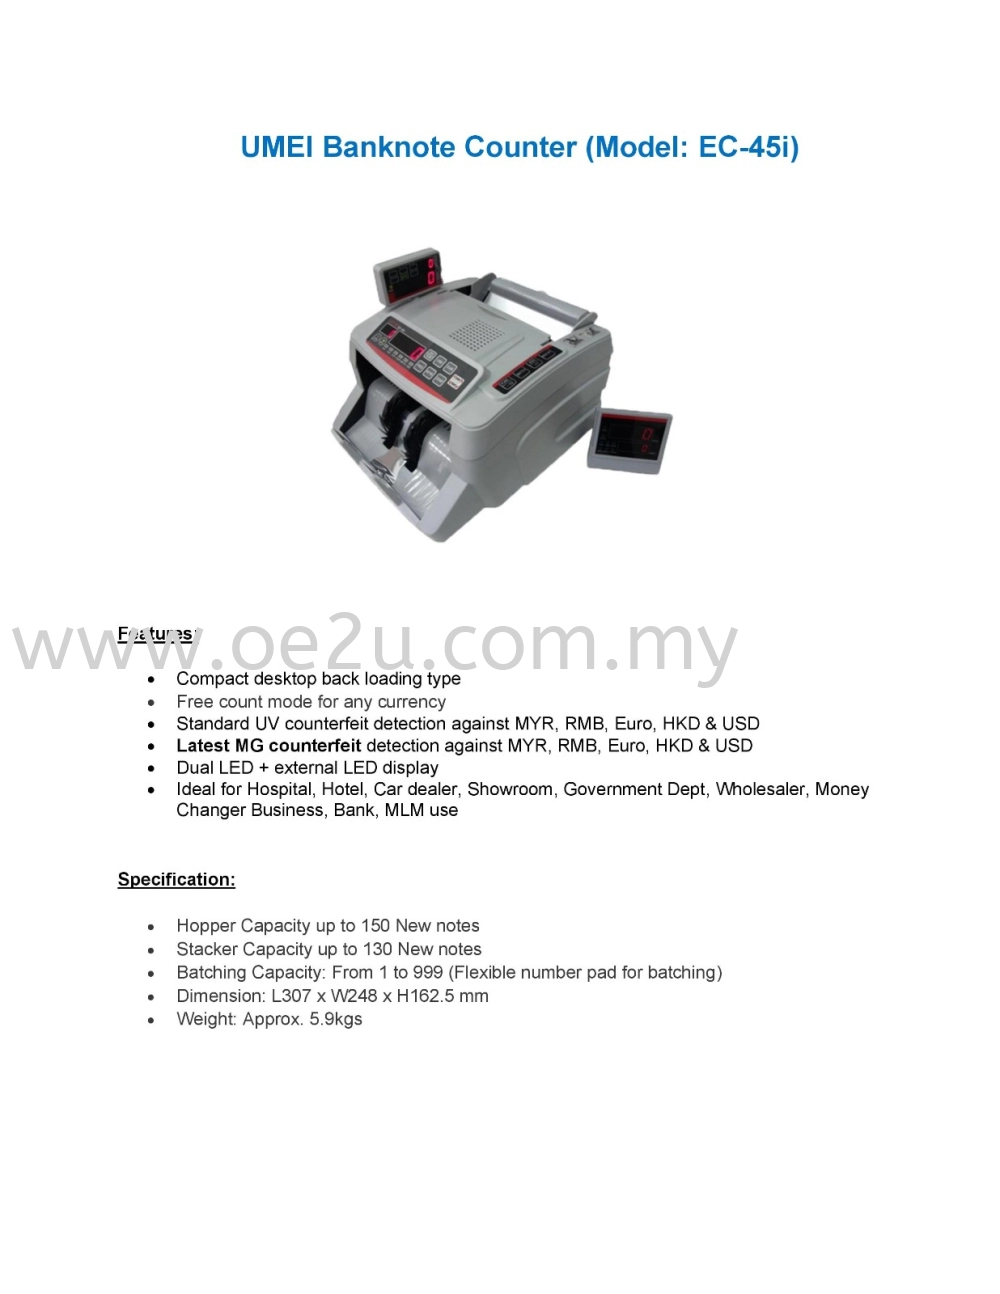 UMEI EC-45i Banknote Counter (Back Loading & Quantity Count)